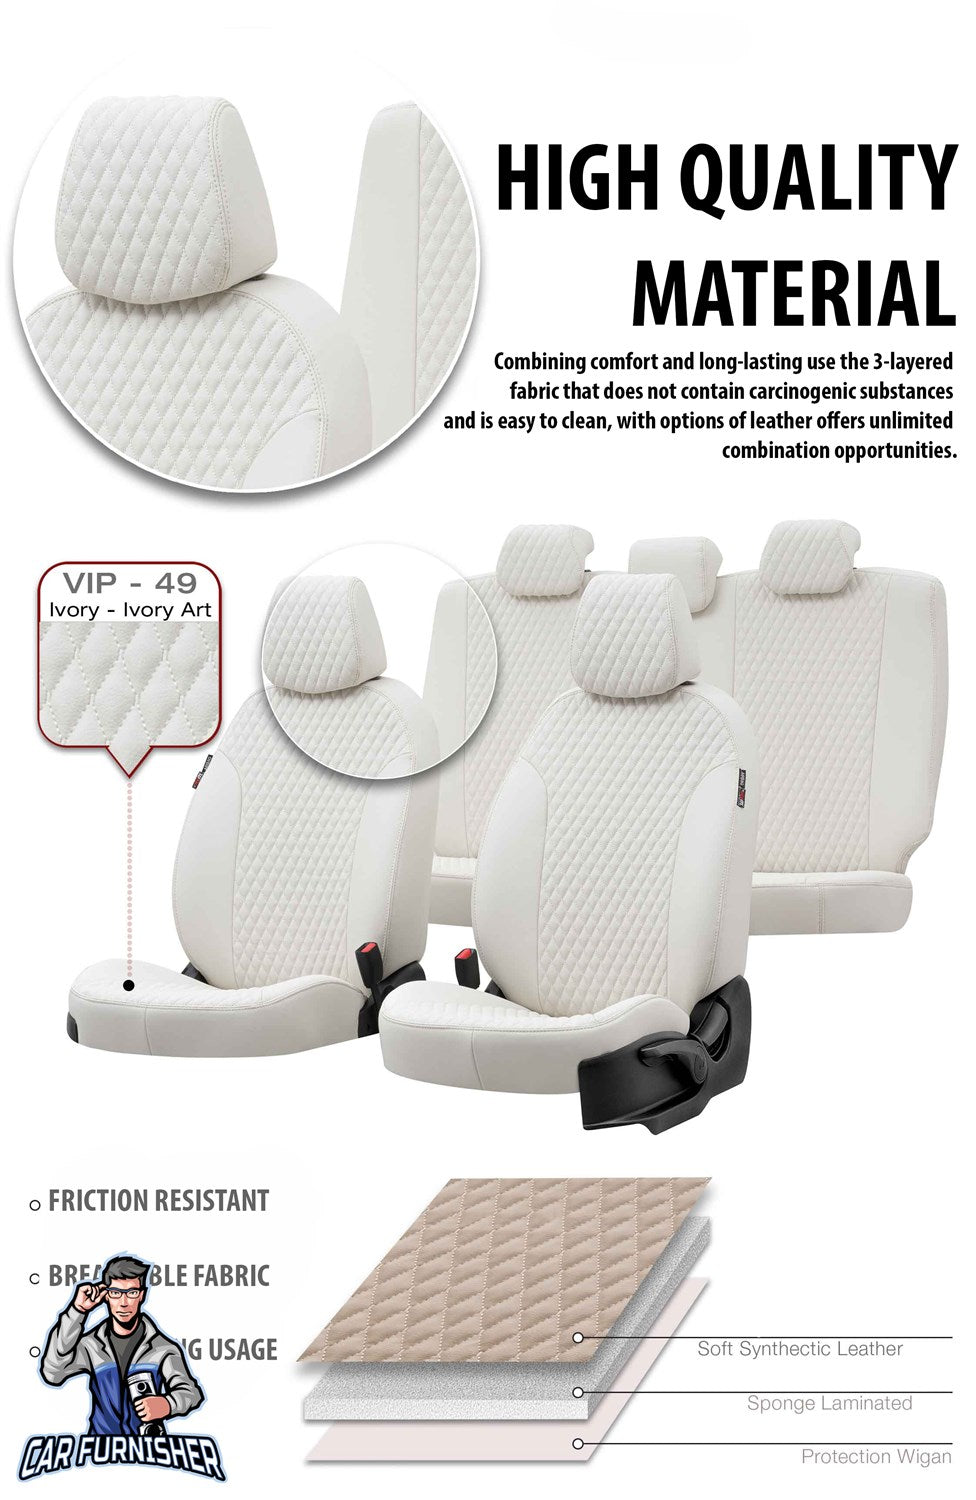 Volkswagen Caddy Seat Cover Amsterdam Leather Design Beige Leather